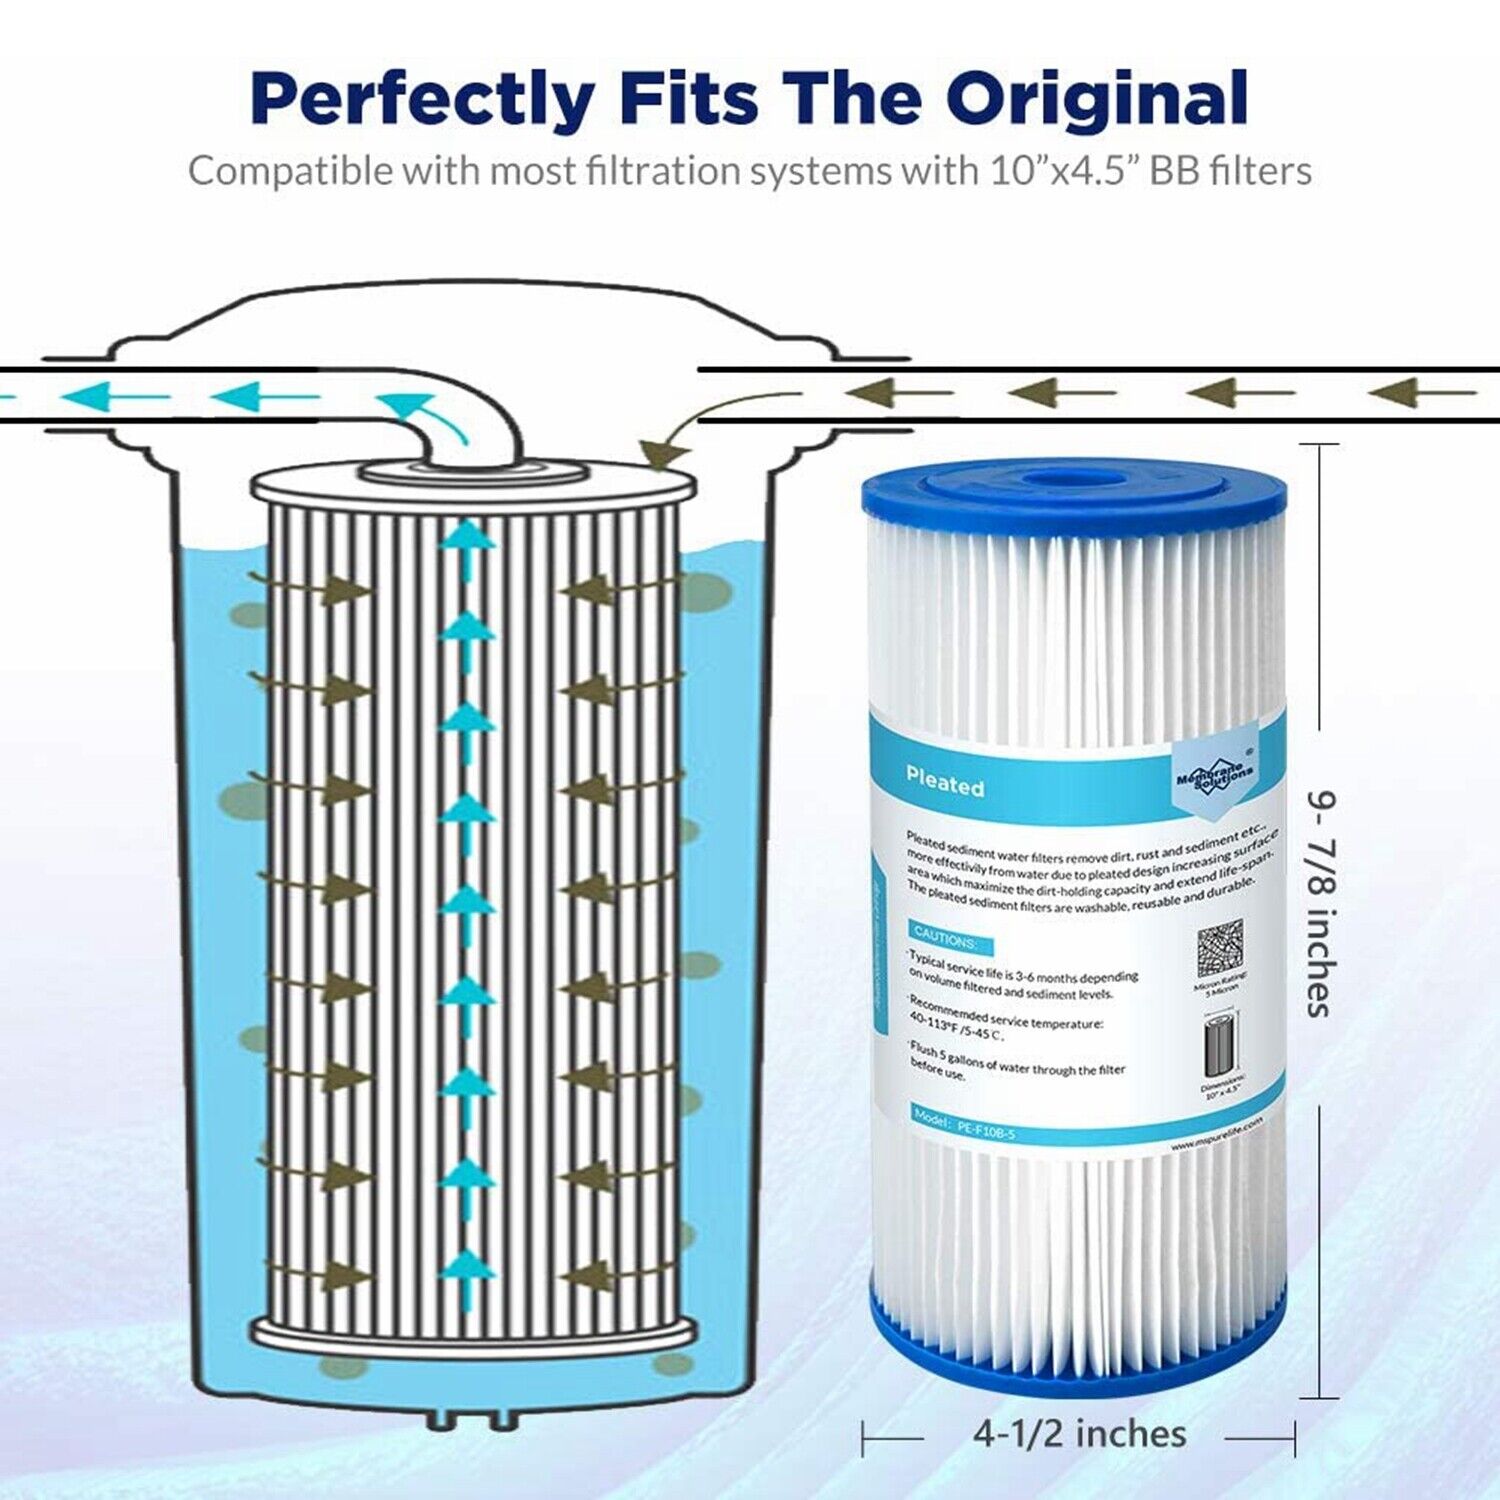 Membrane Solutions Pleated Water Filter Home 10"x4.5" Whole House Heavy Duty Sediment Replacement Cartridge